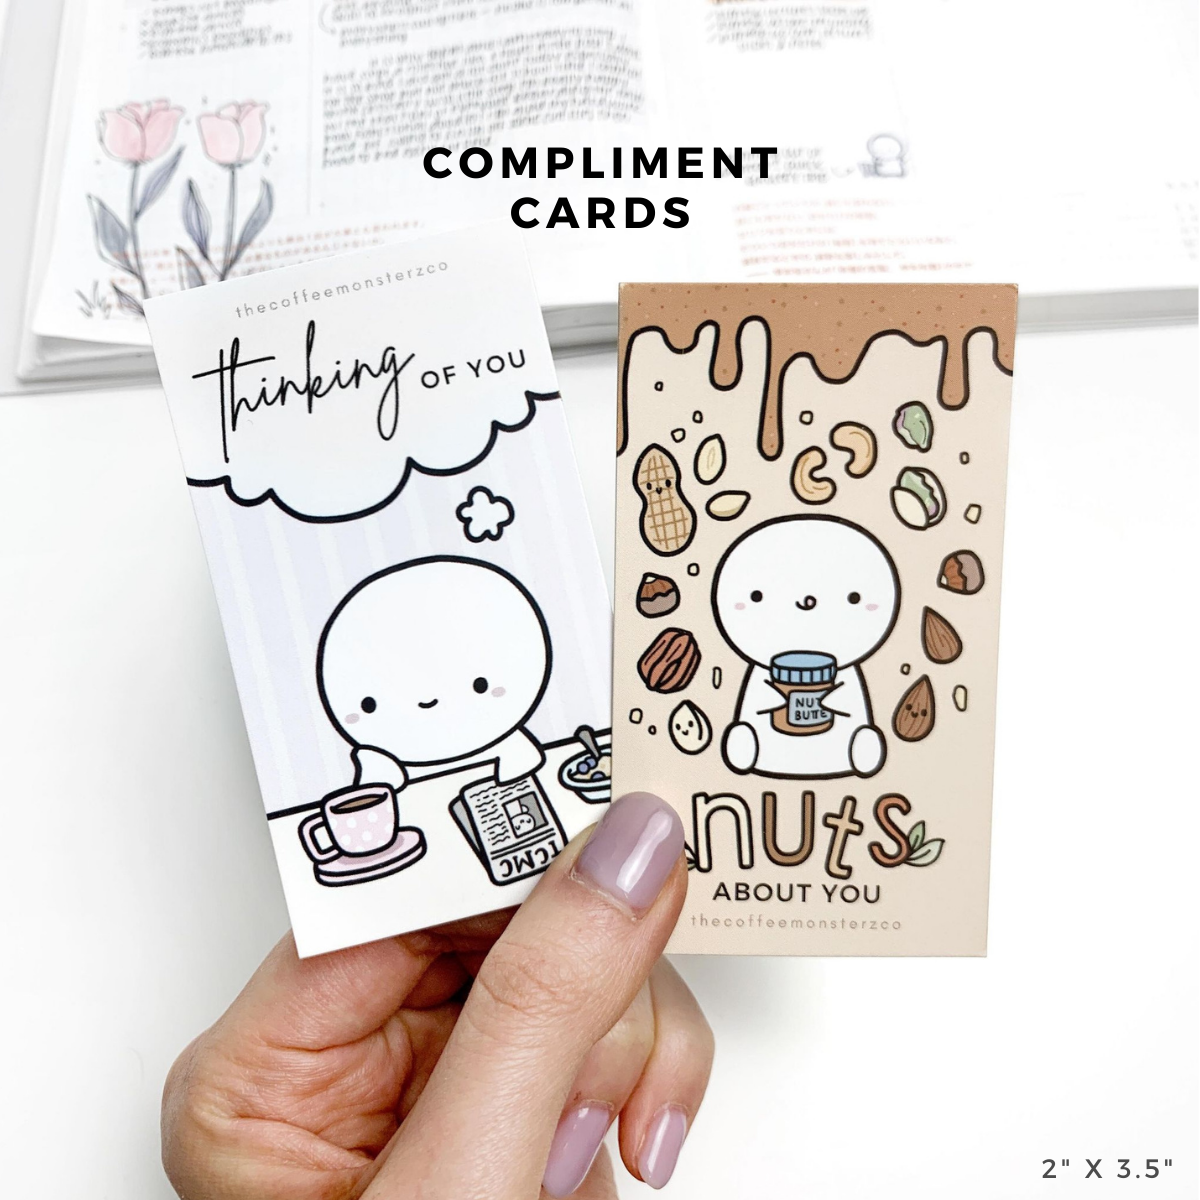 Compliment Cards